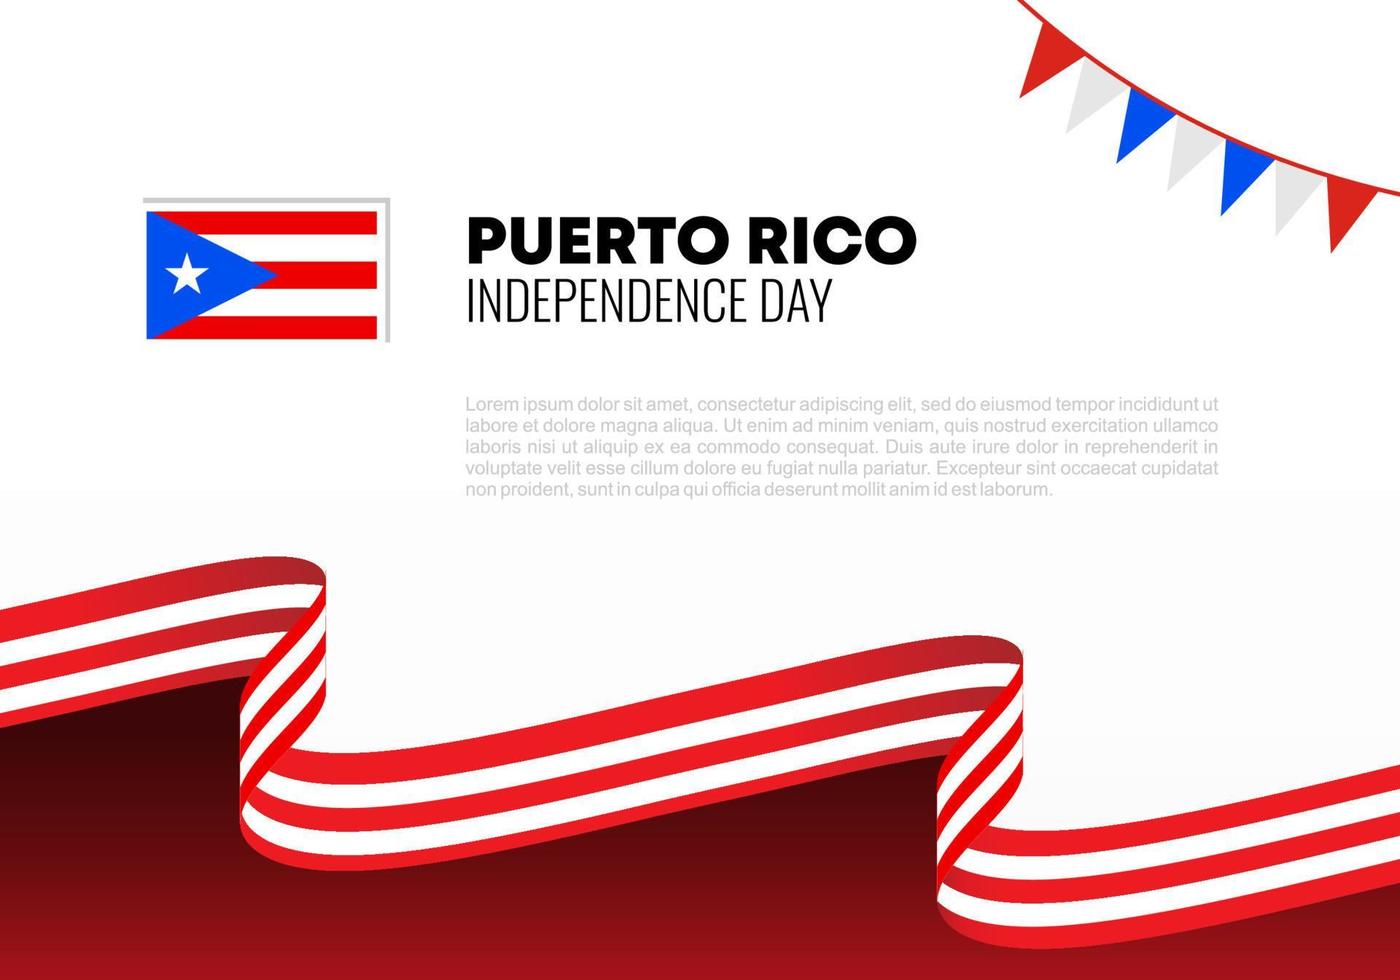 Puerto Rico independence day background on July 4. vector